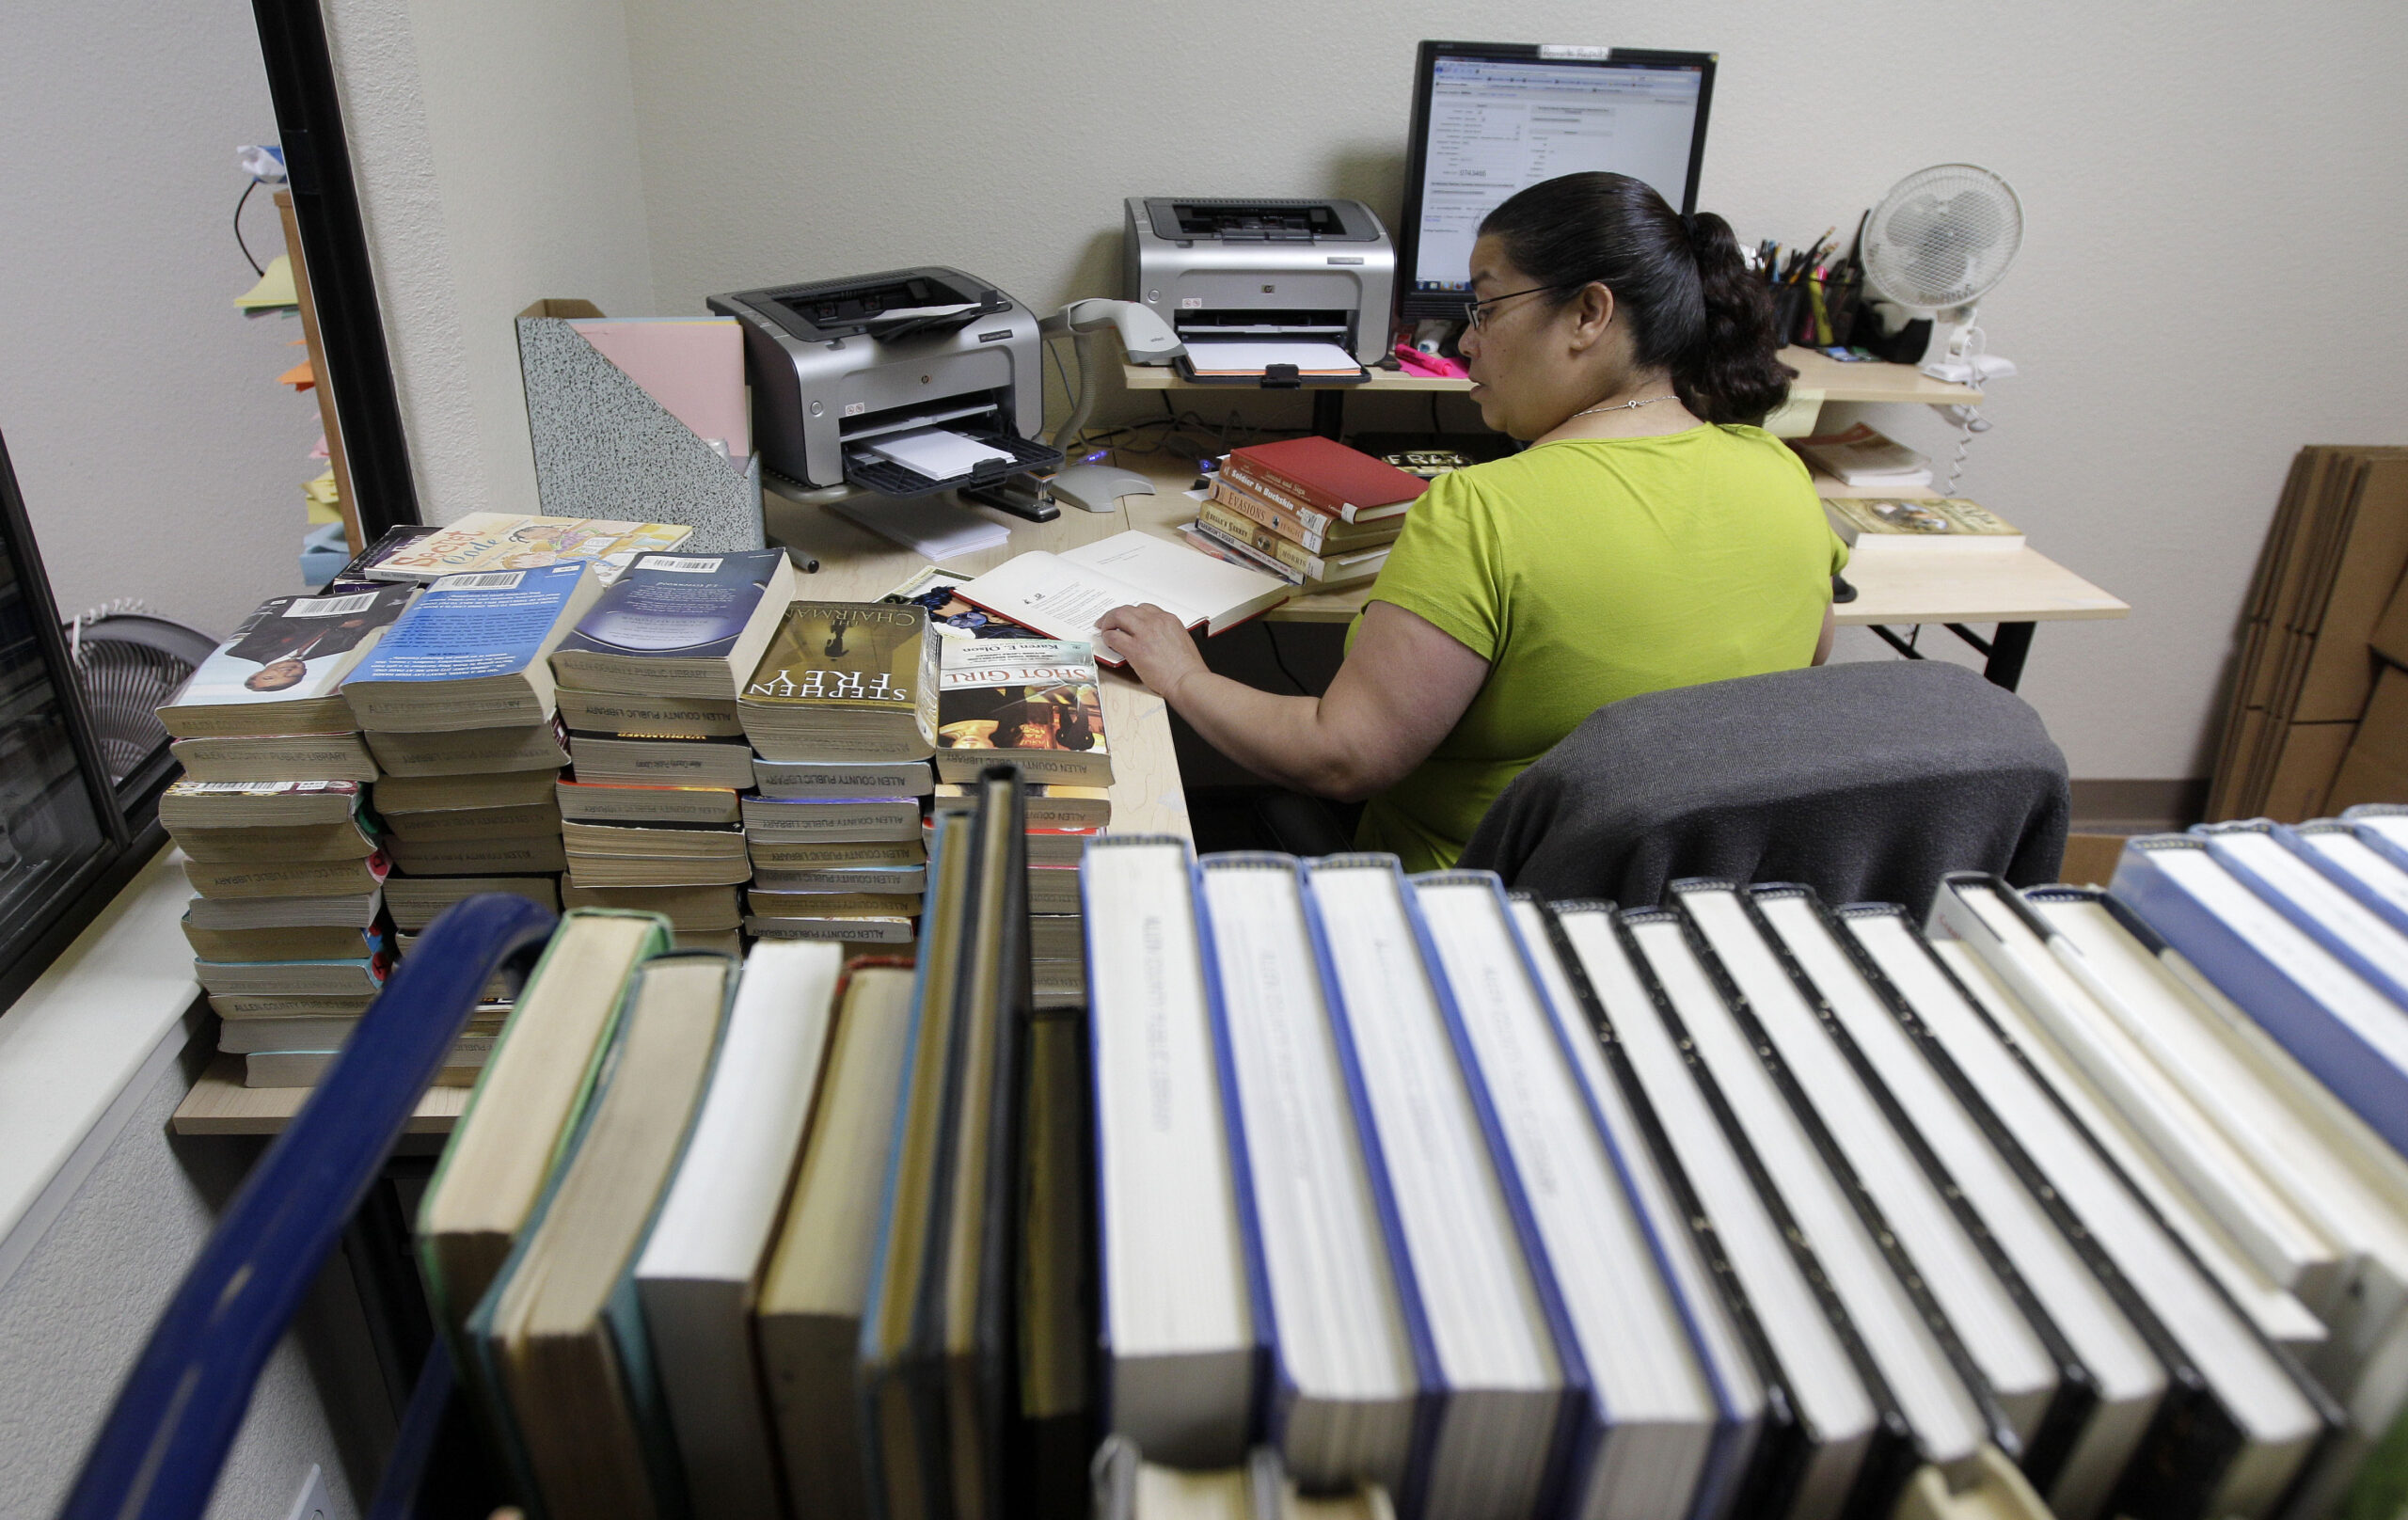 Books are catalogued at the Internet Archive's Physical Archive warehouse in Richmond, Calif.